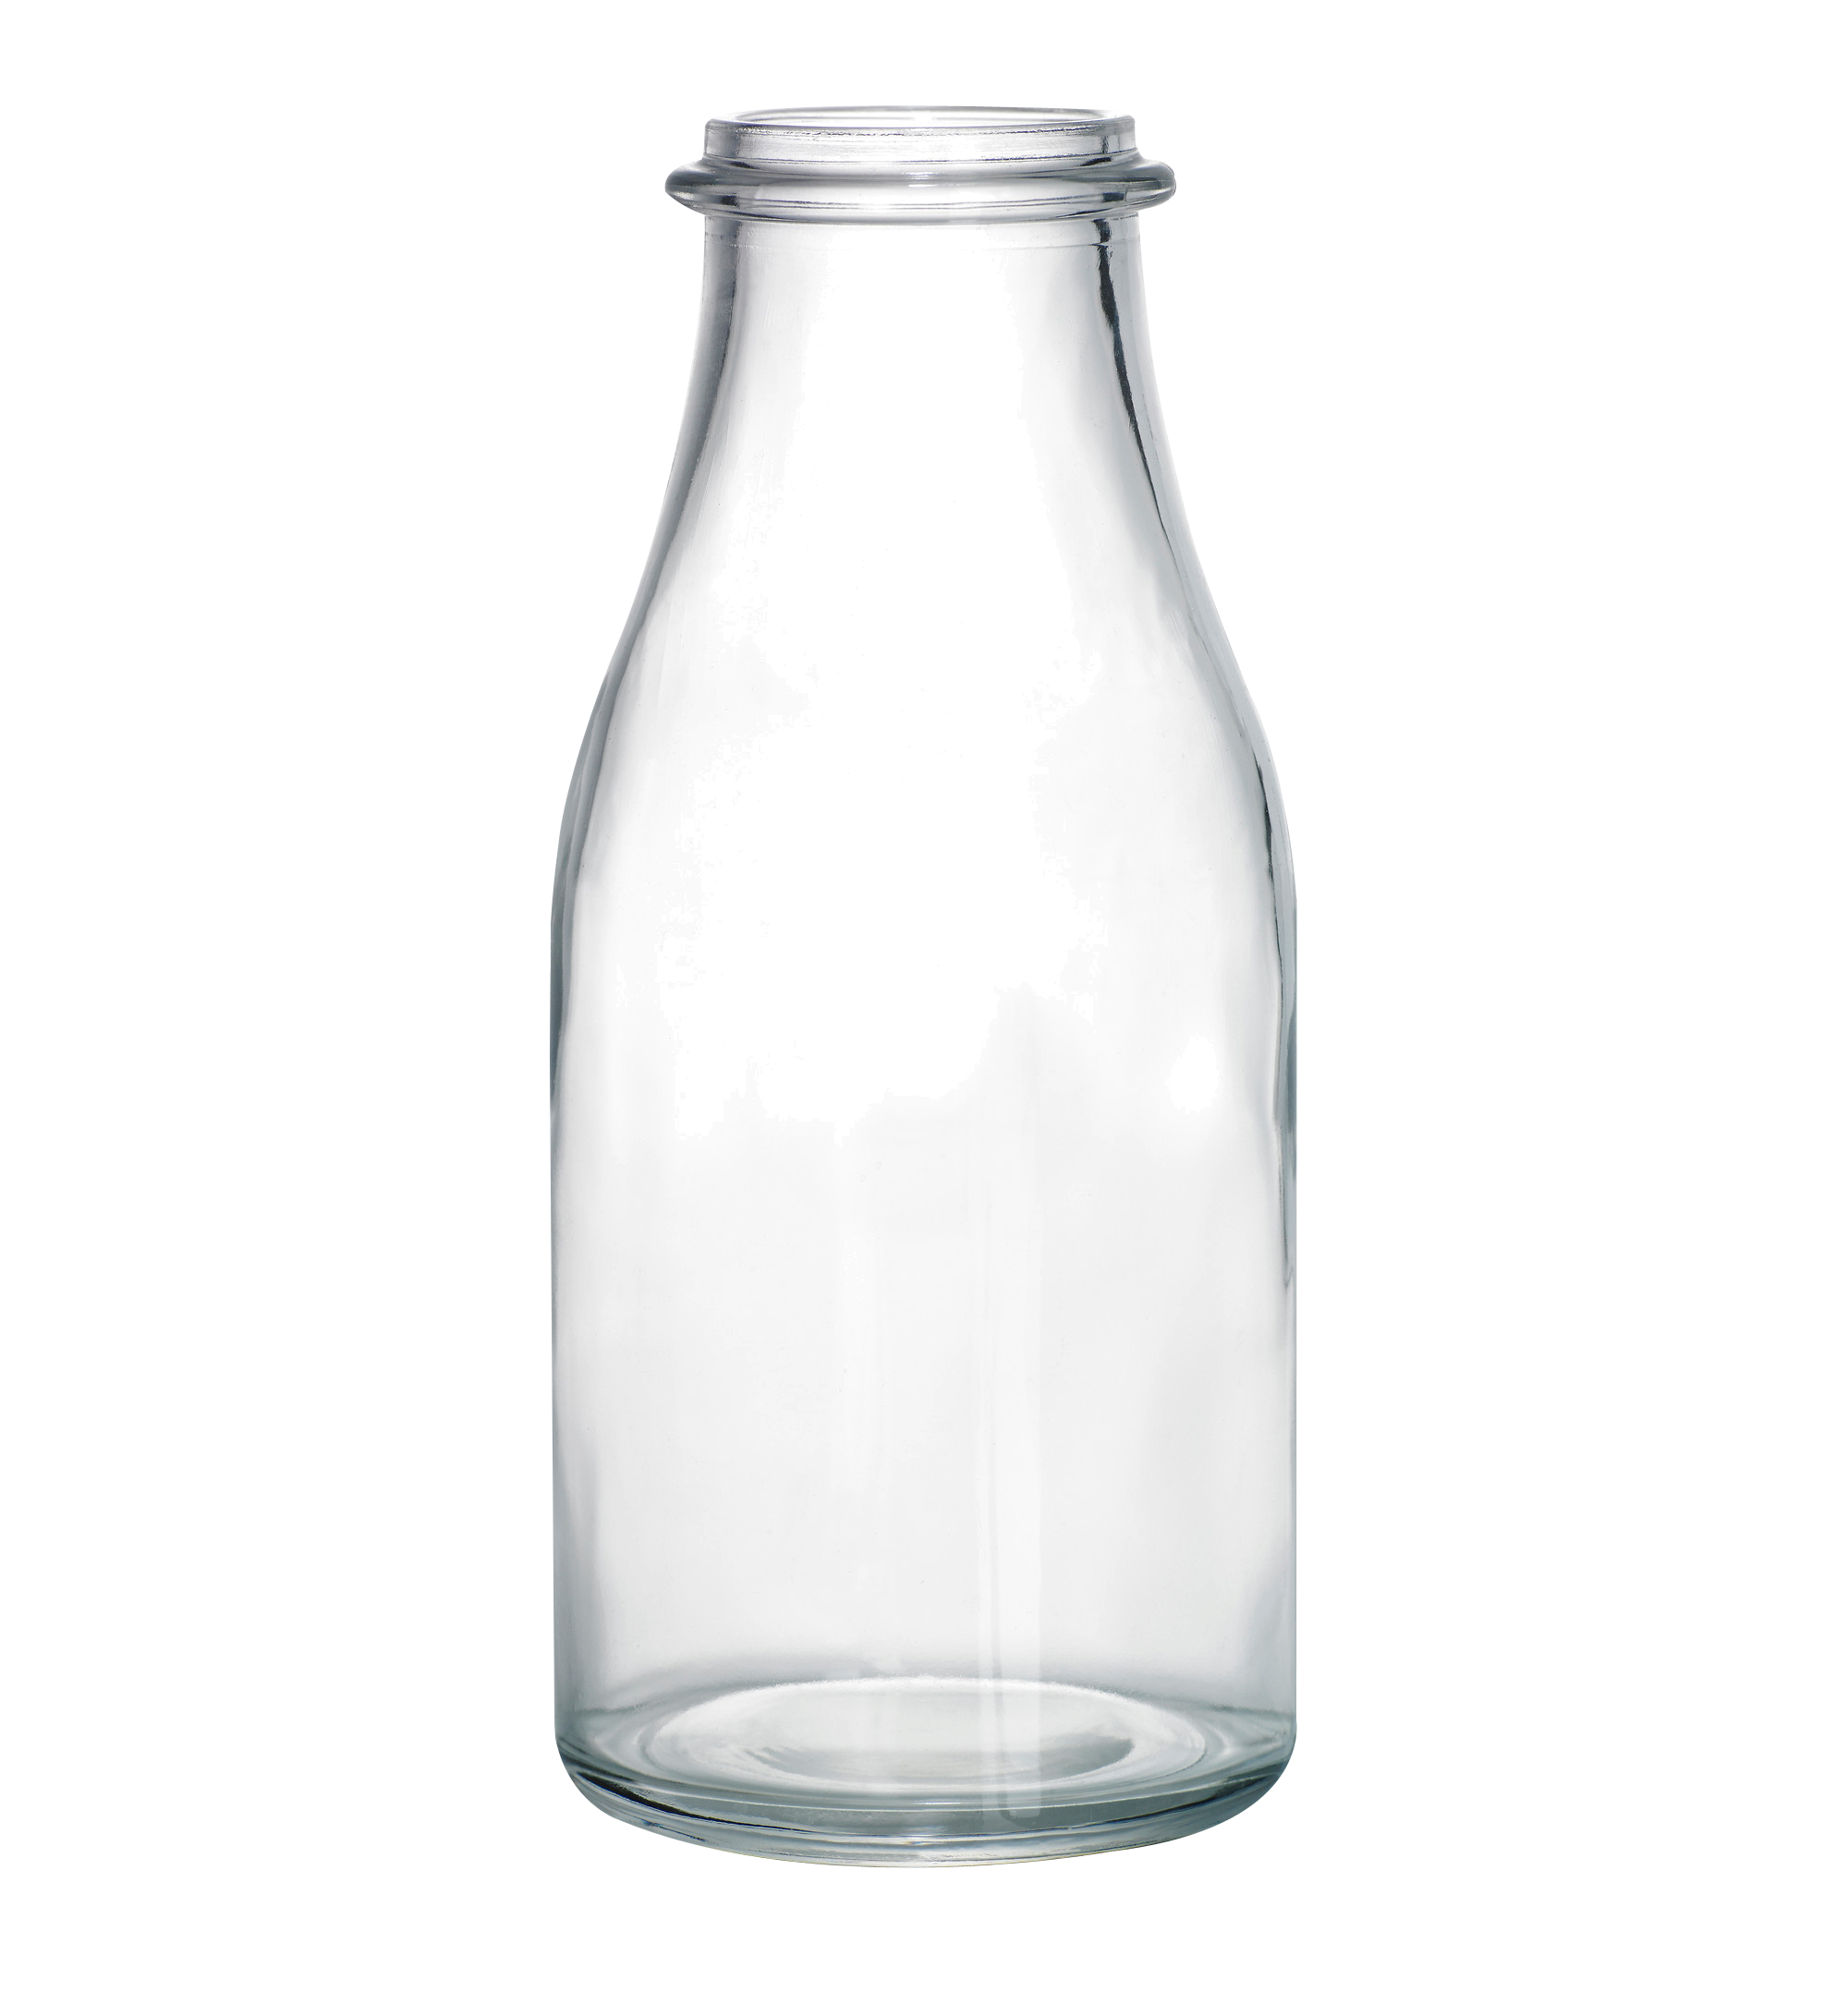 Bottle PNG image, free downlo